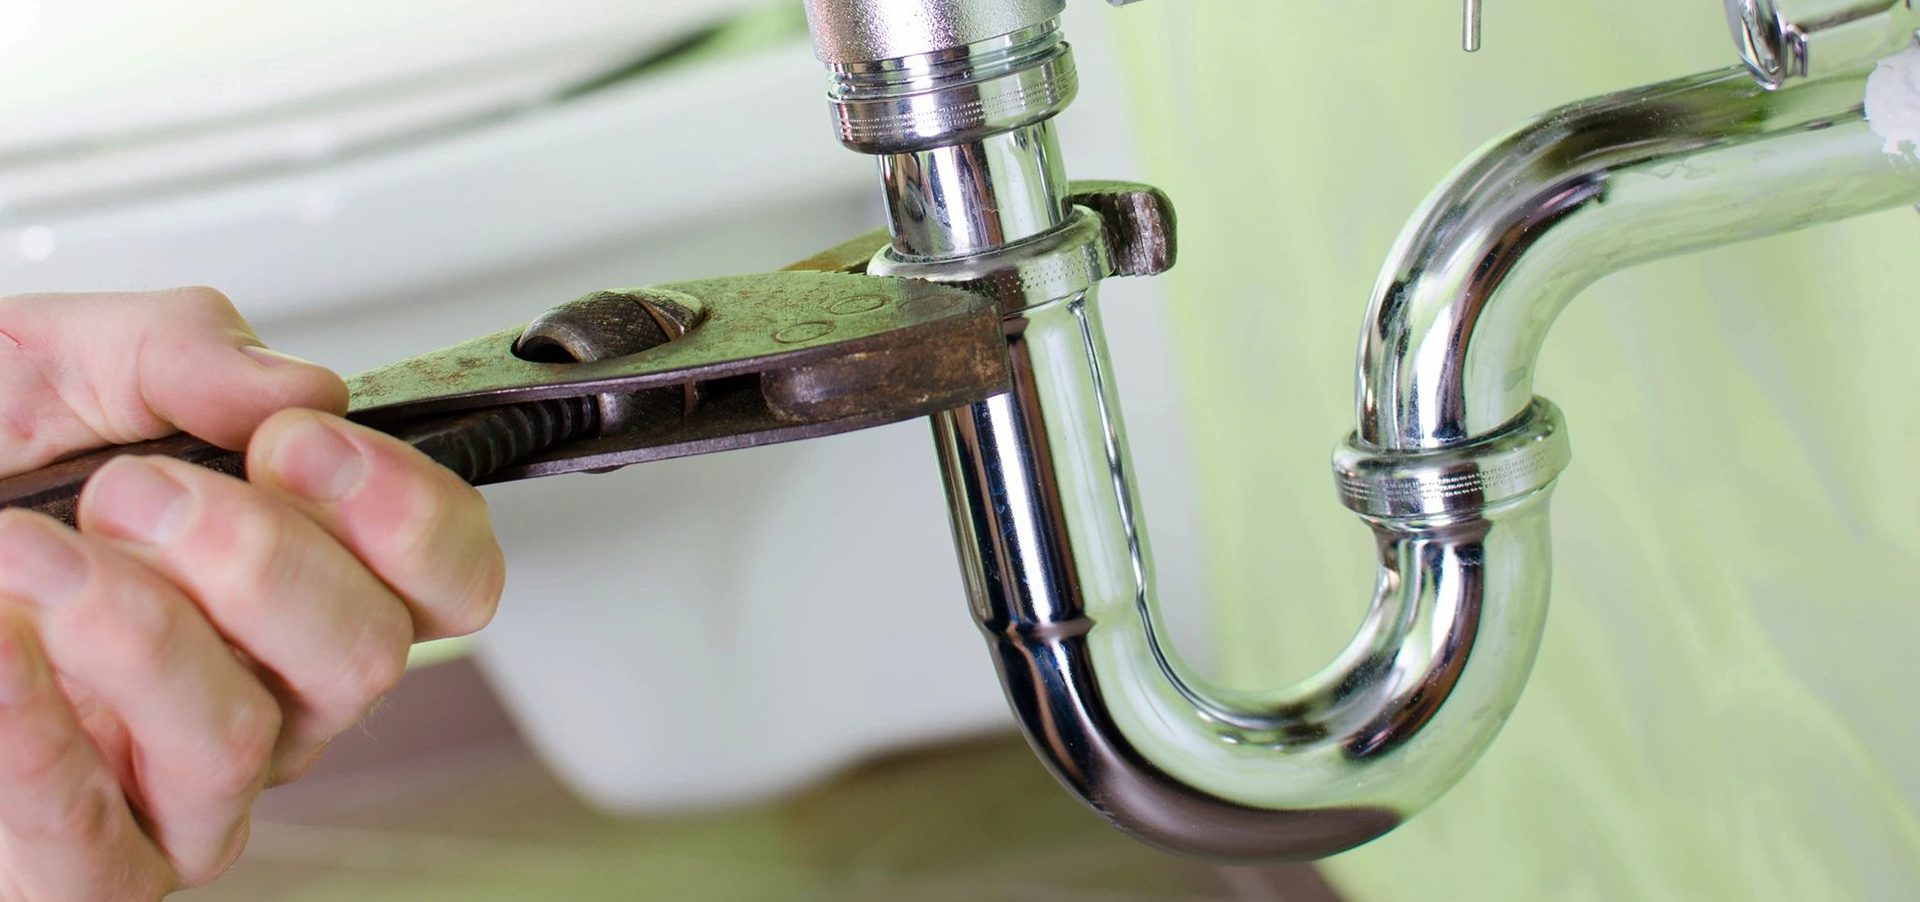 A close up of the faucet on a sink